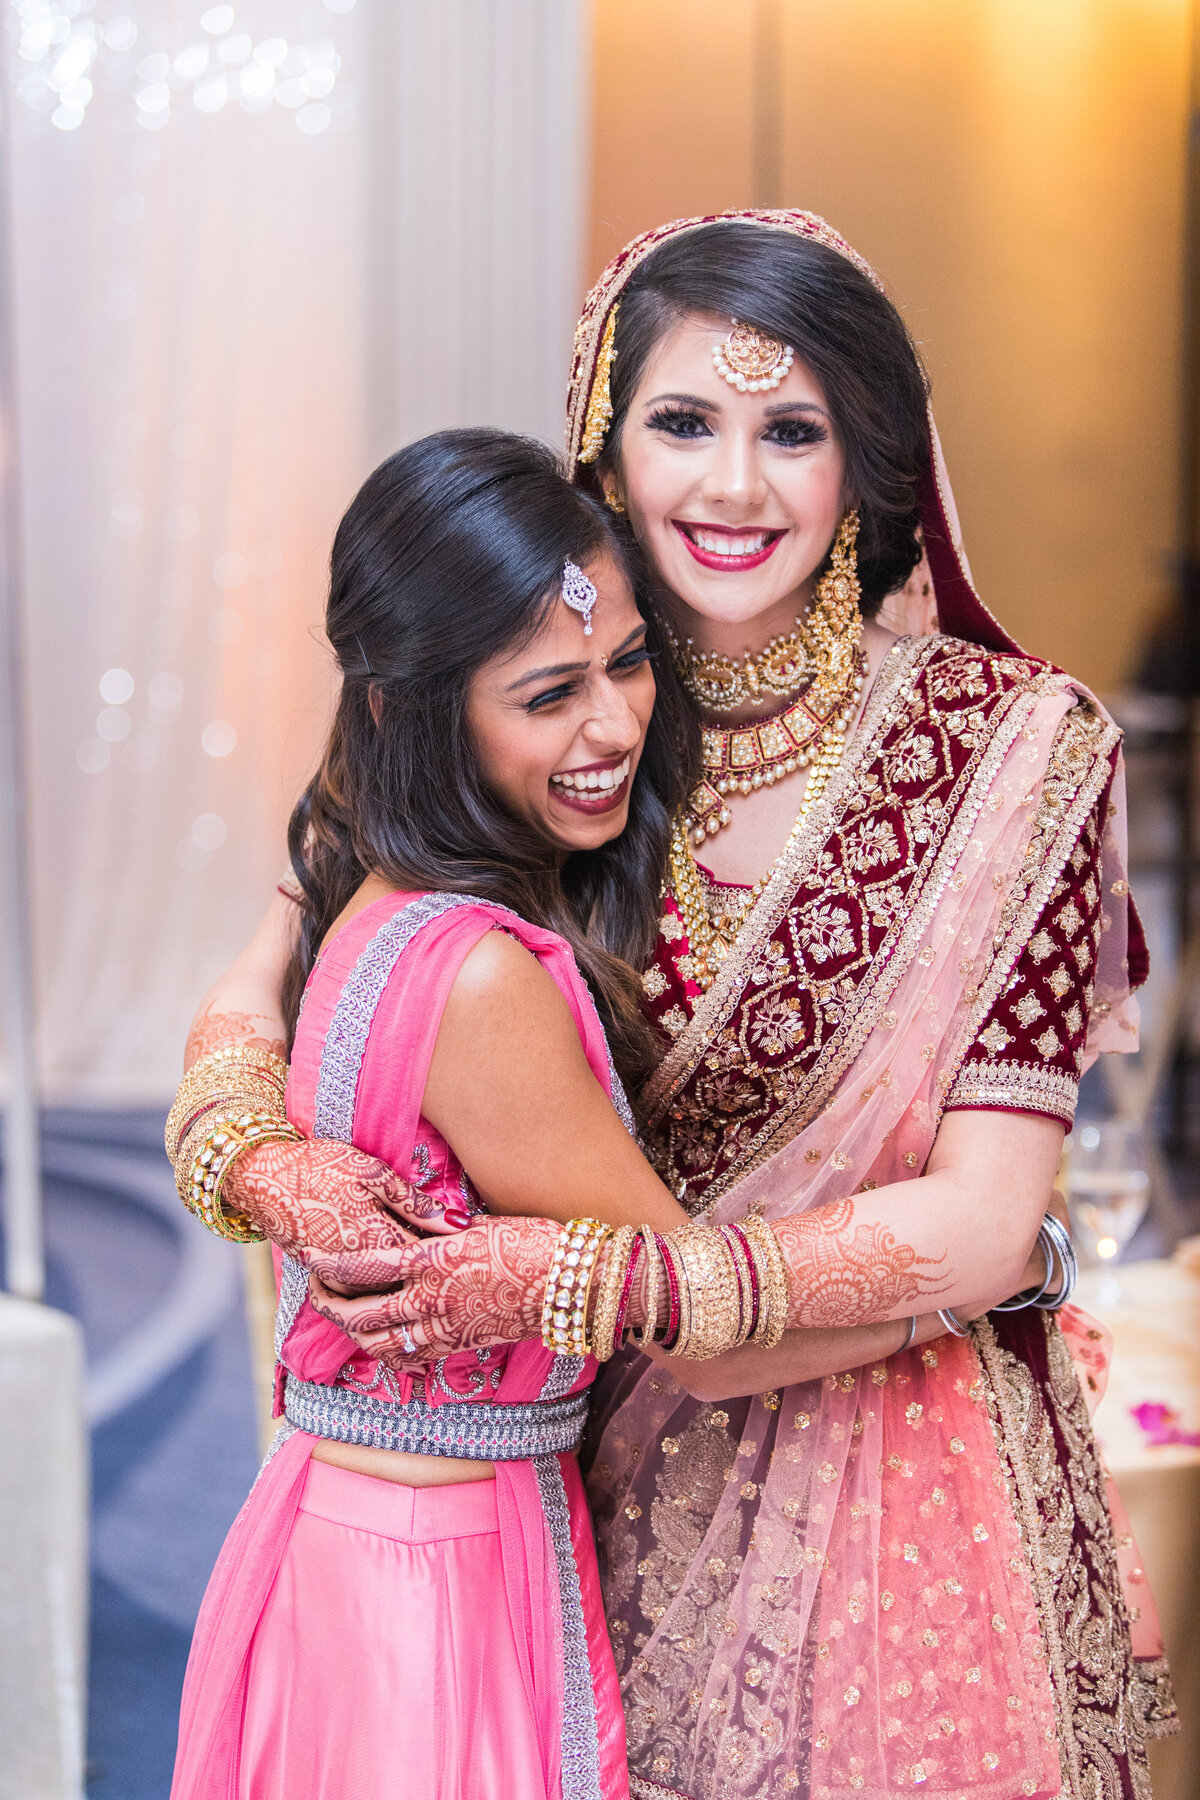 maha_studios_wedding_photography_chicago_new_york_california_sophisticated_and_vibrant_photography_honoring_modern_south_asian_and_multicultural_weddings89